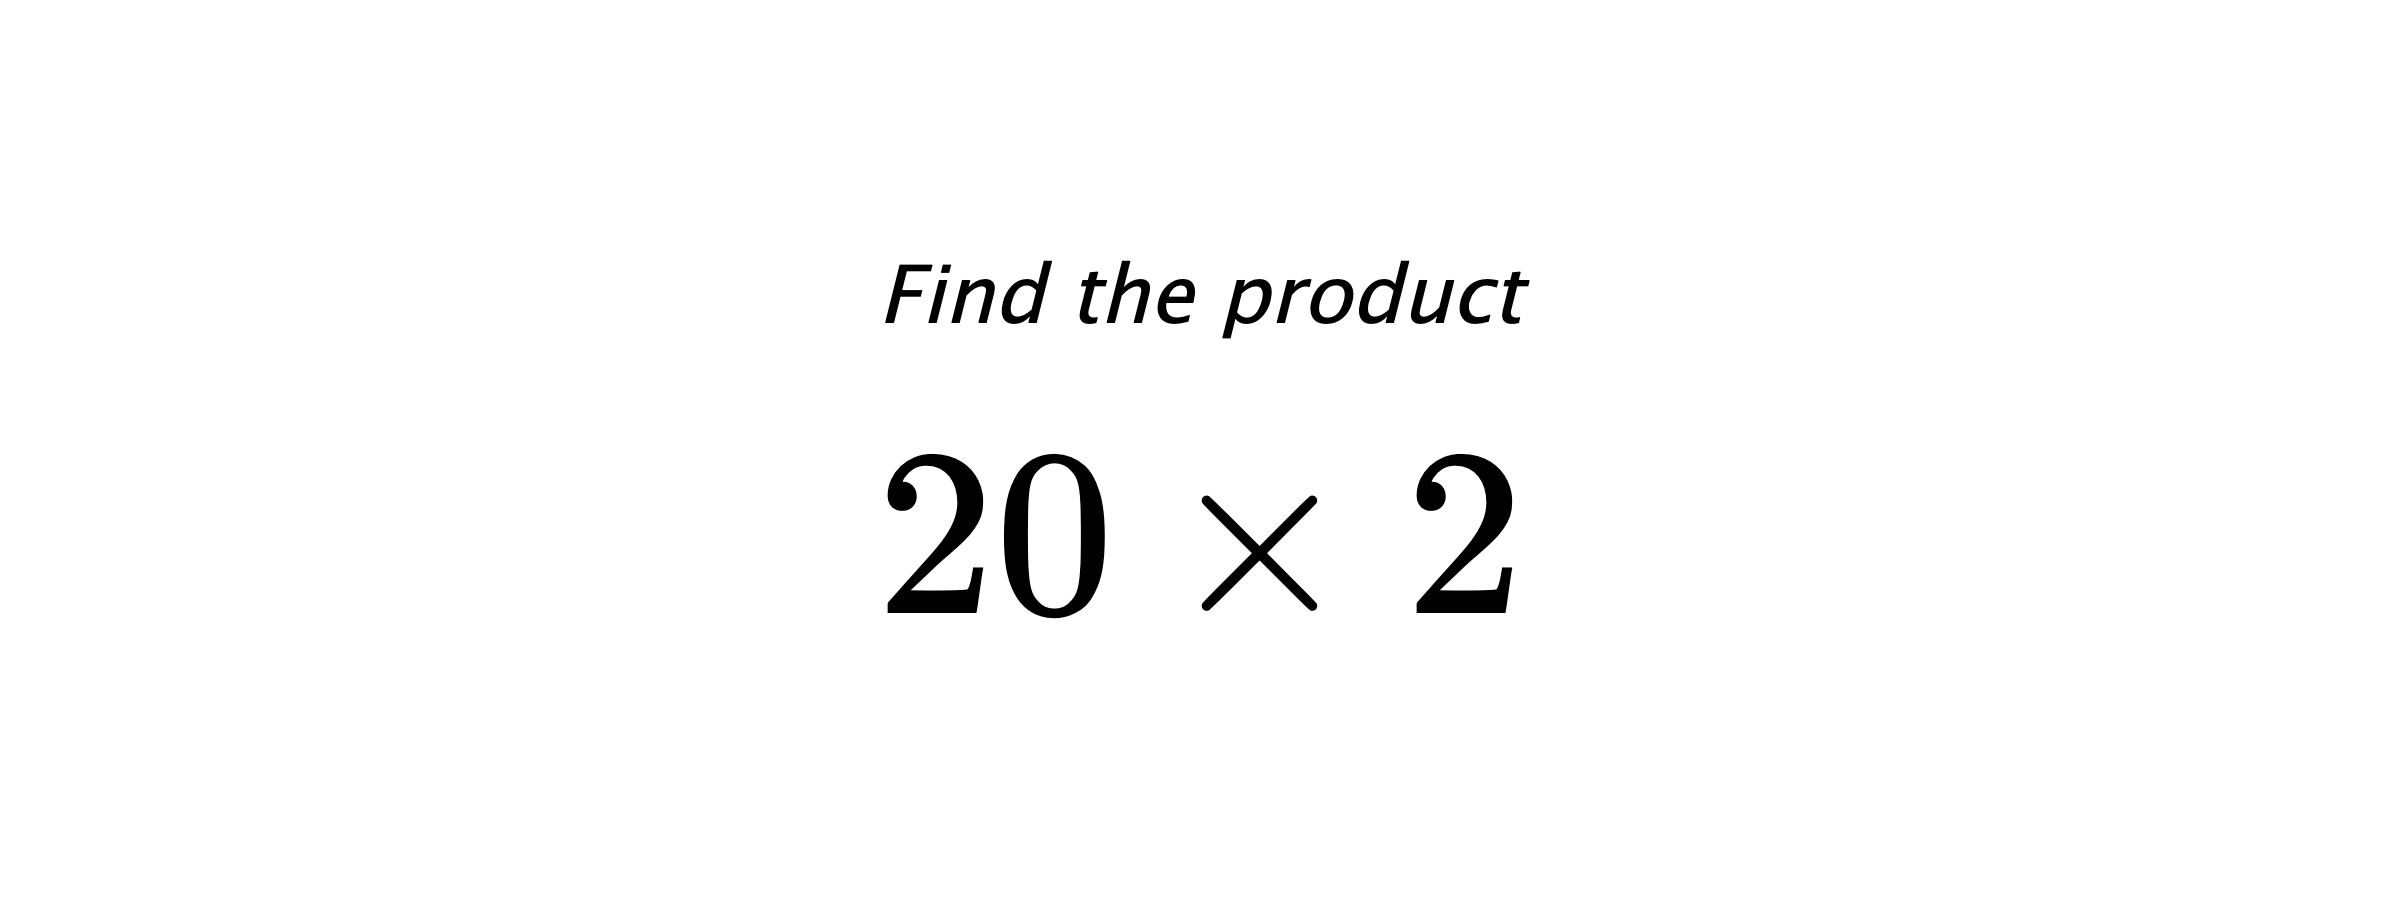 Find the product $ 20 \times 2 $